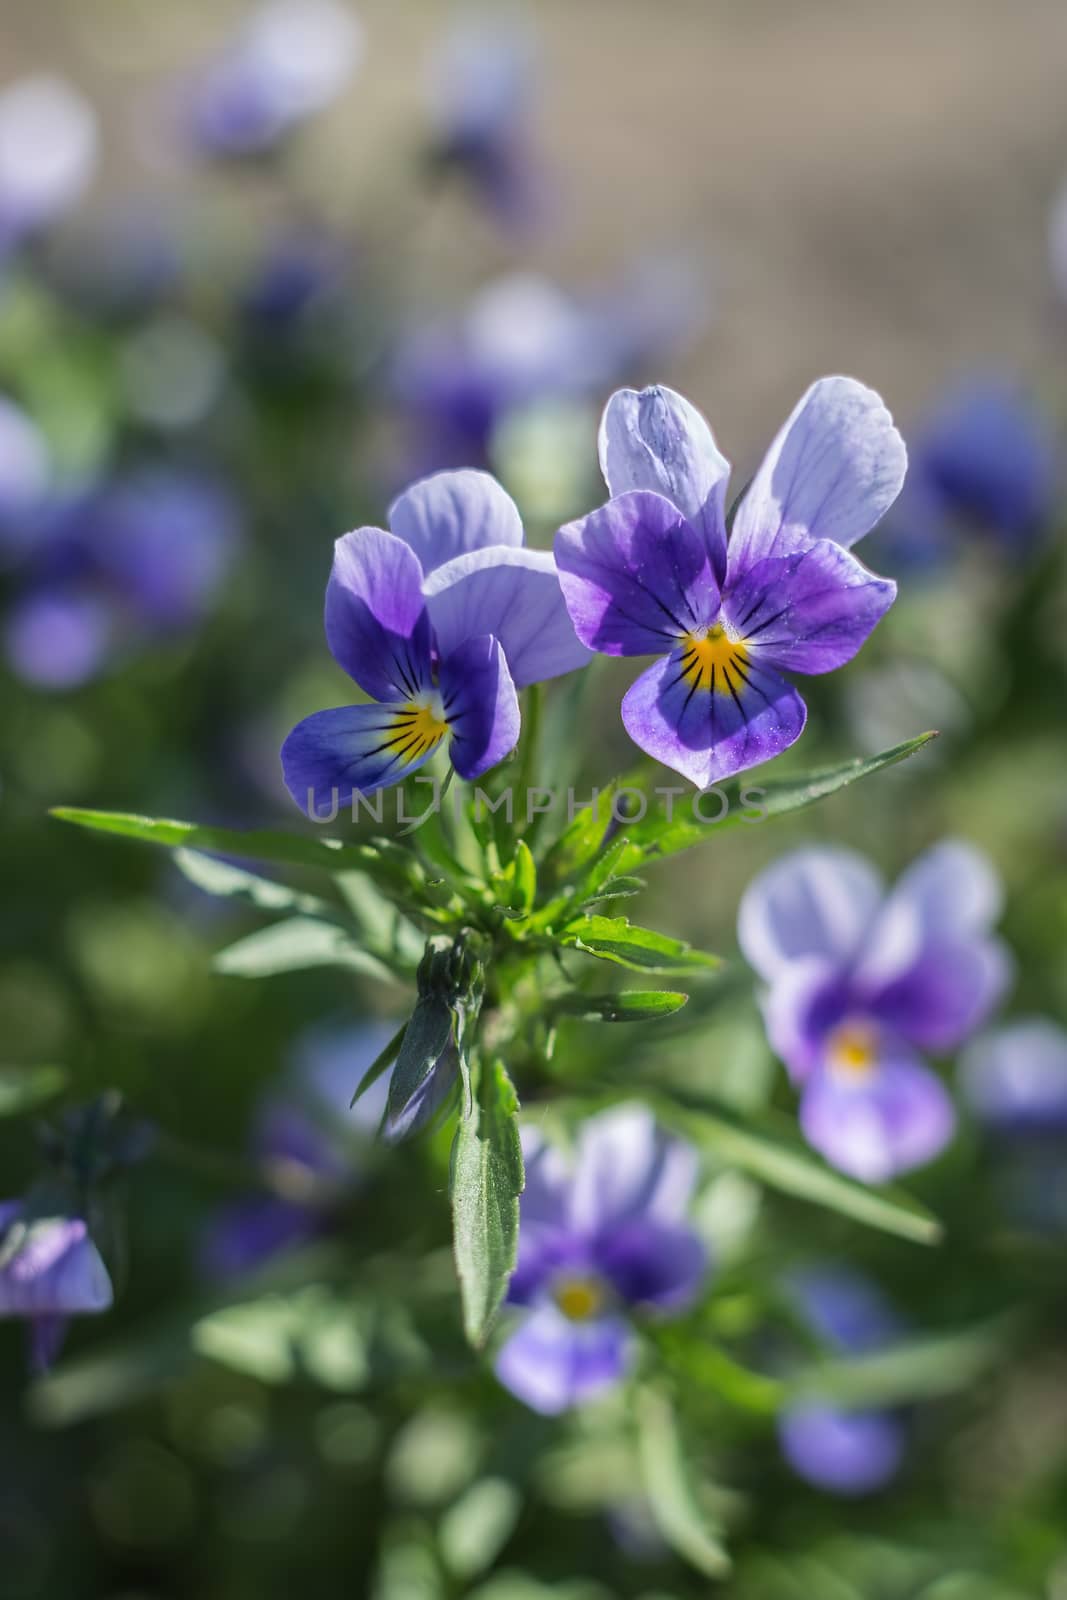 Blossoming violets on a blurred background with shallow depth of field